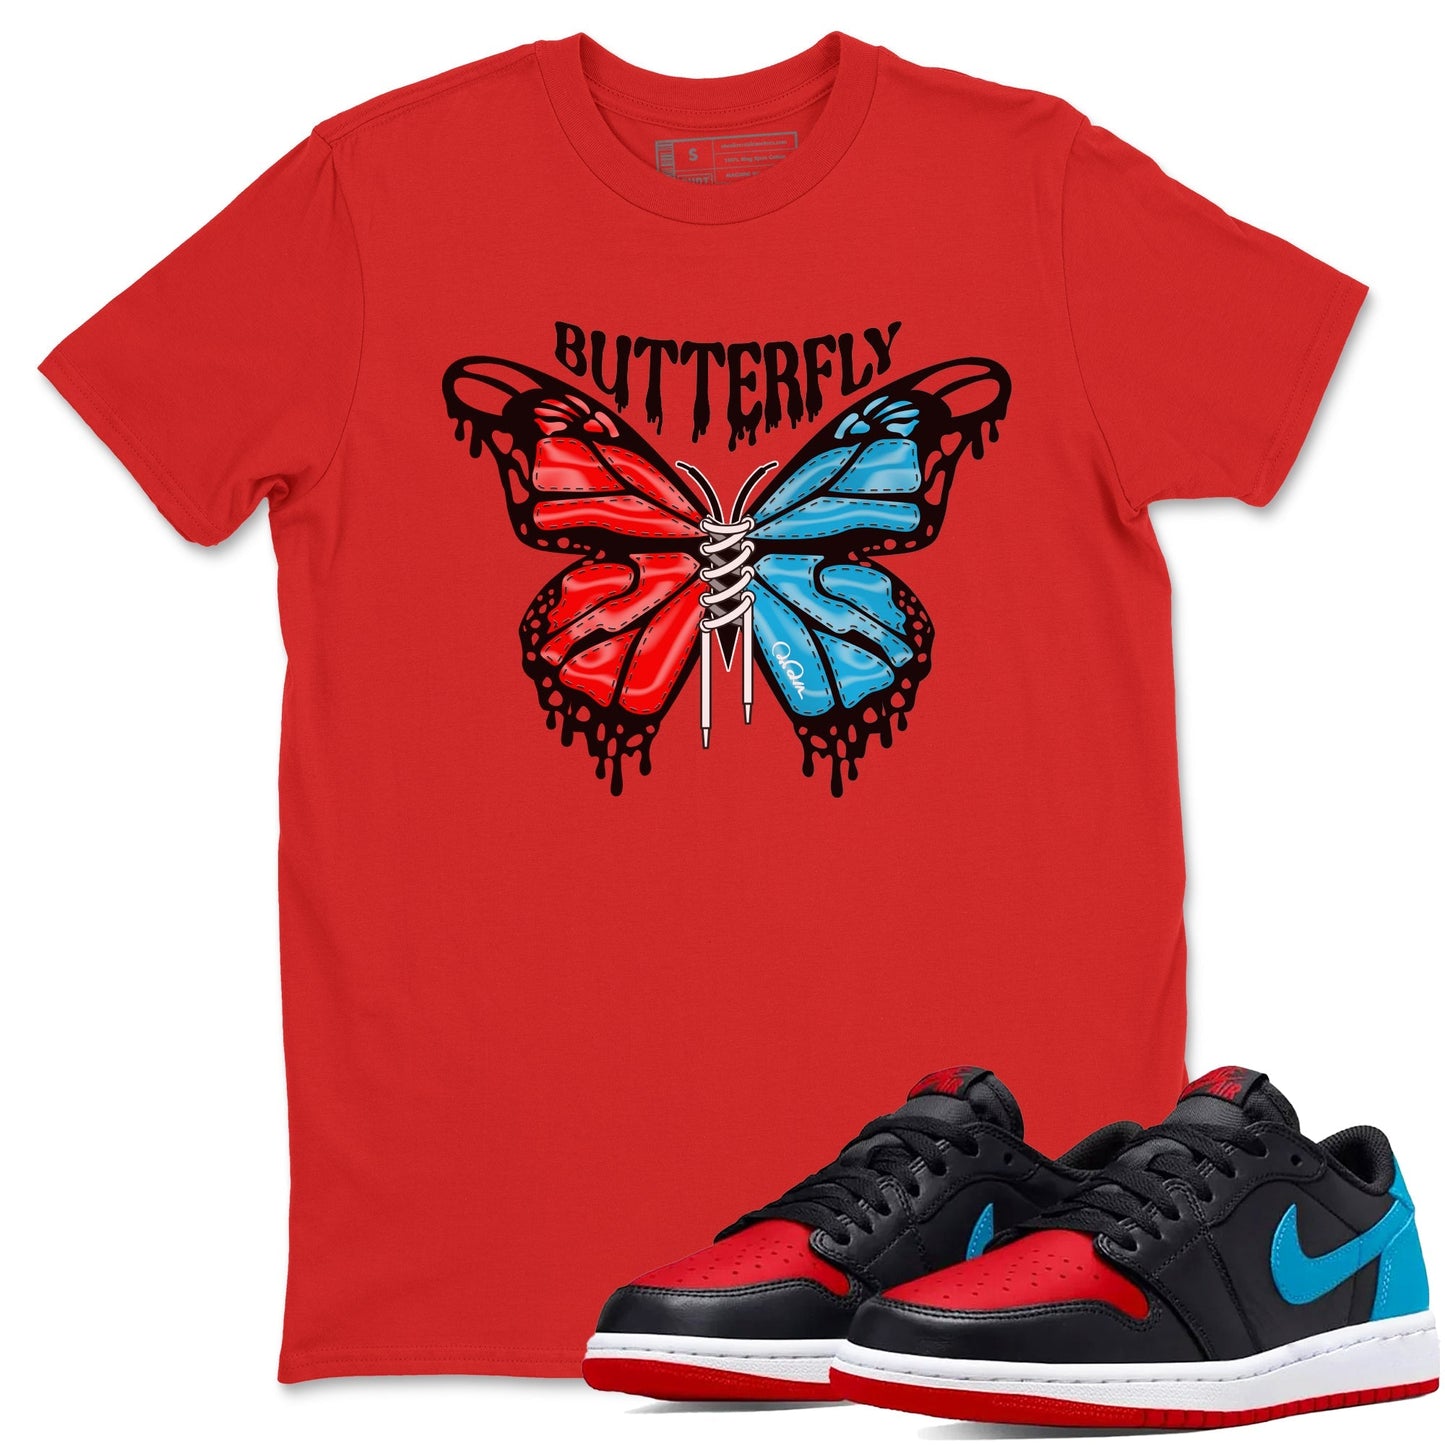 Air Jordan 1 UNC to Chicago Sneaker Match Tees Butterfly Streetwear Sneaker Shirt AJ1 UNC to Chicago Sneaker Release Tees Unisex Shirts Red 1